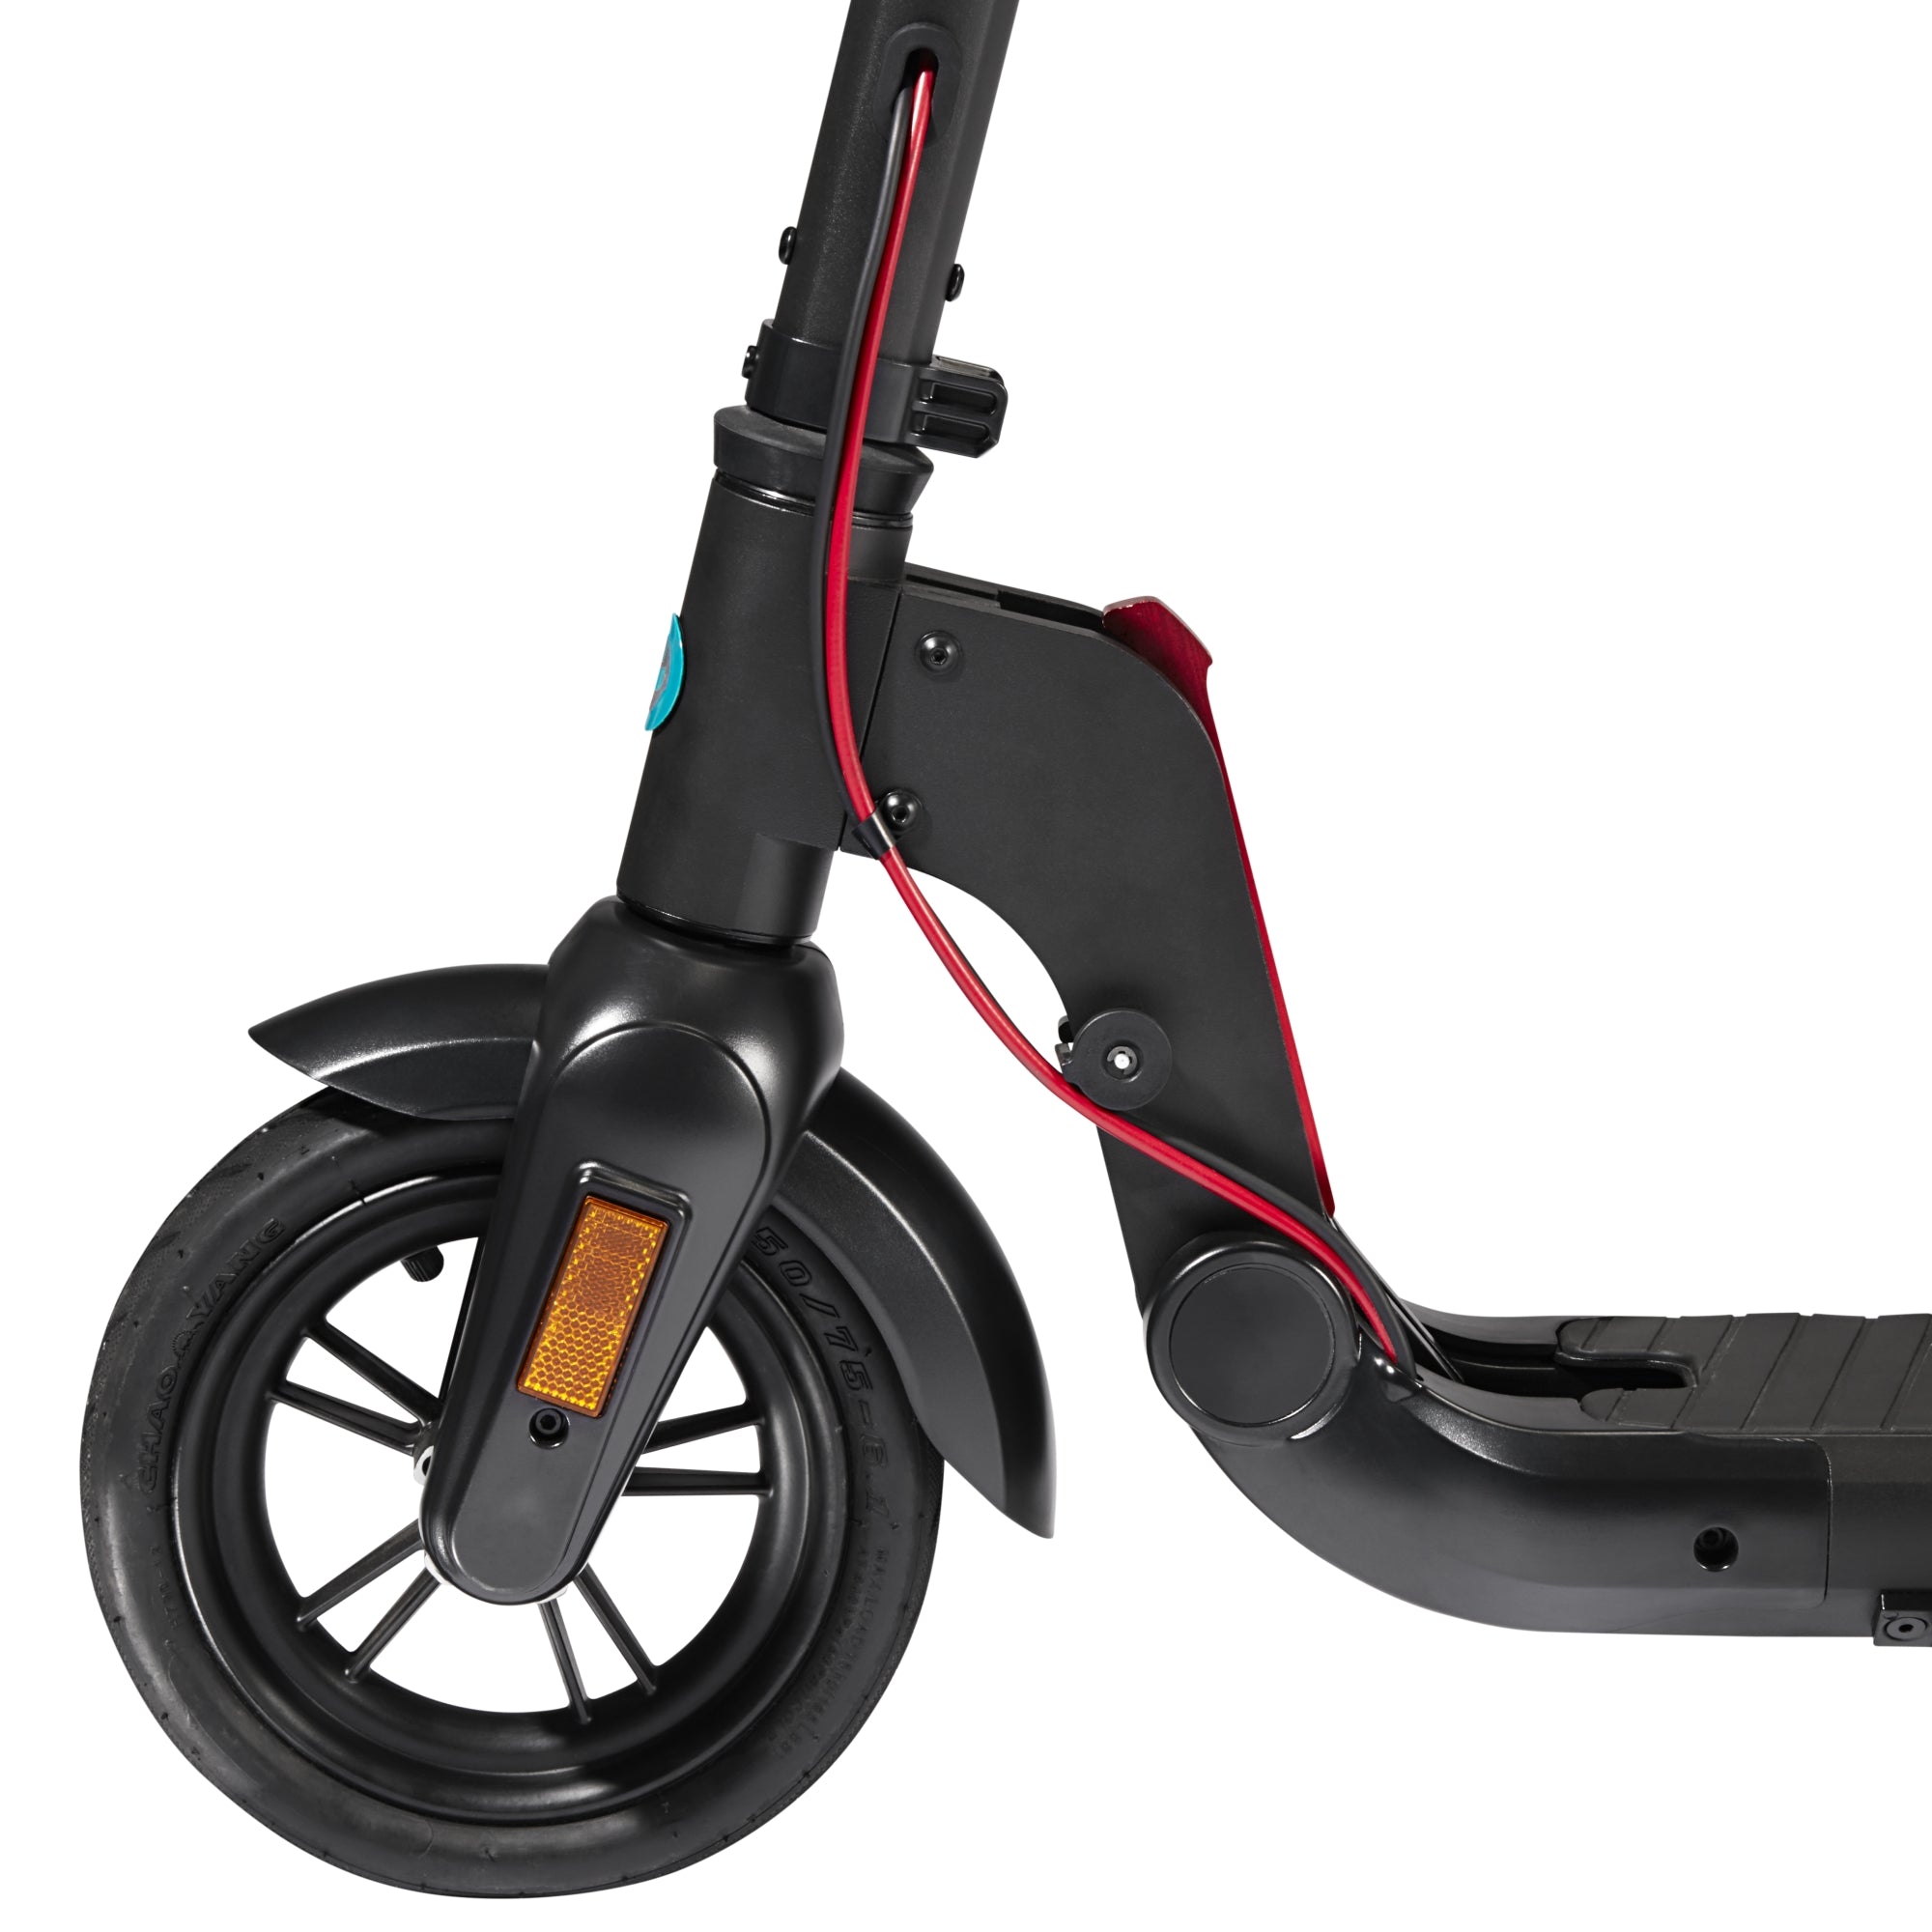 Refurbished Apex Pro Electric Scooter - GOTRAX